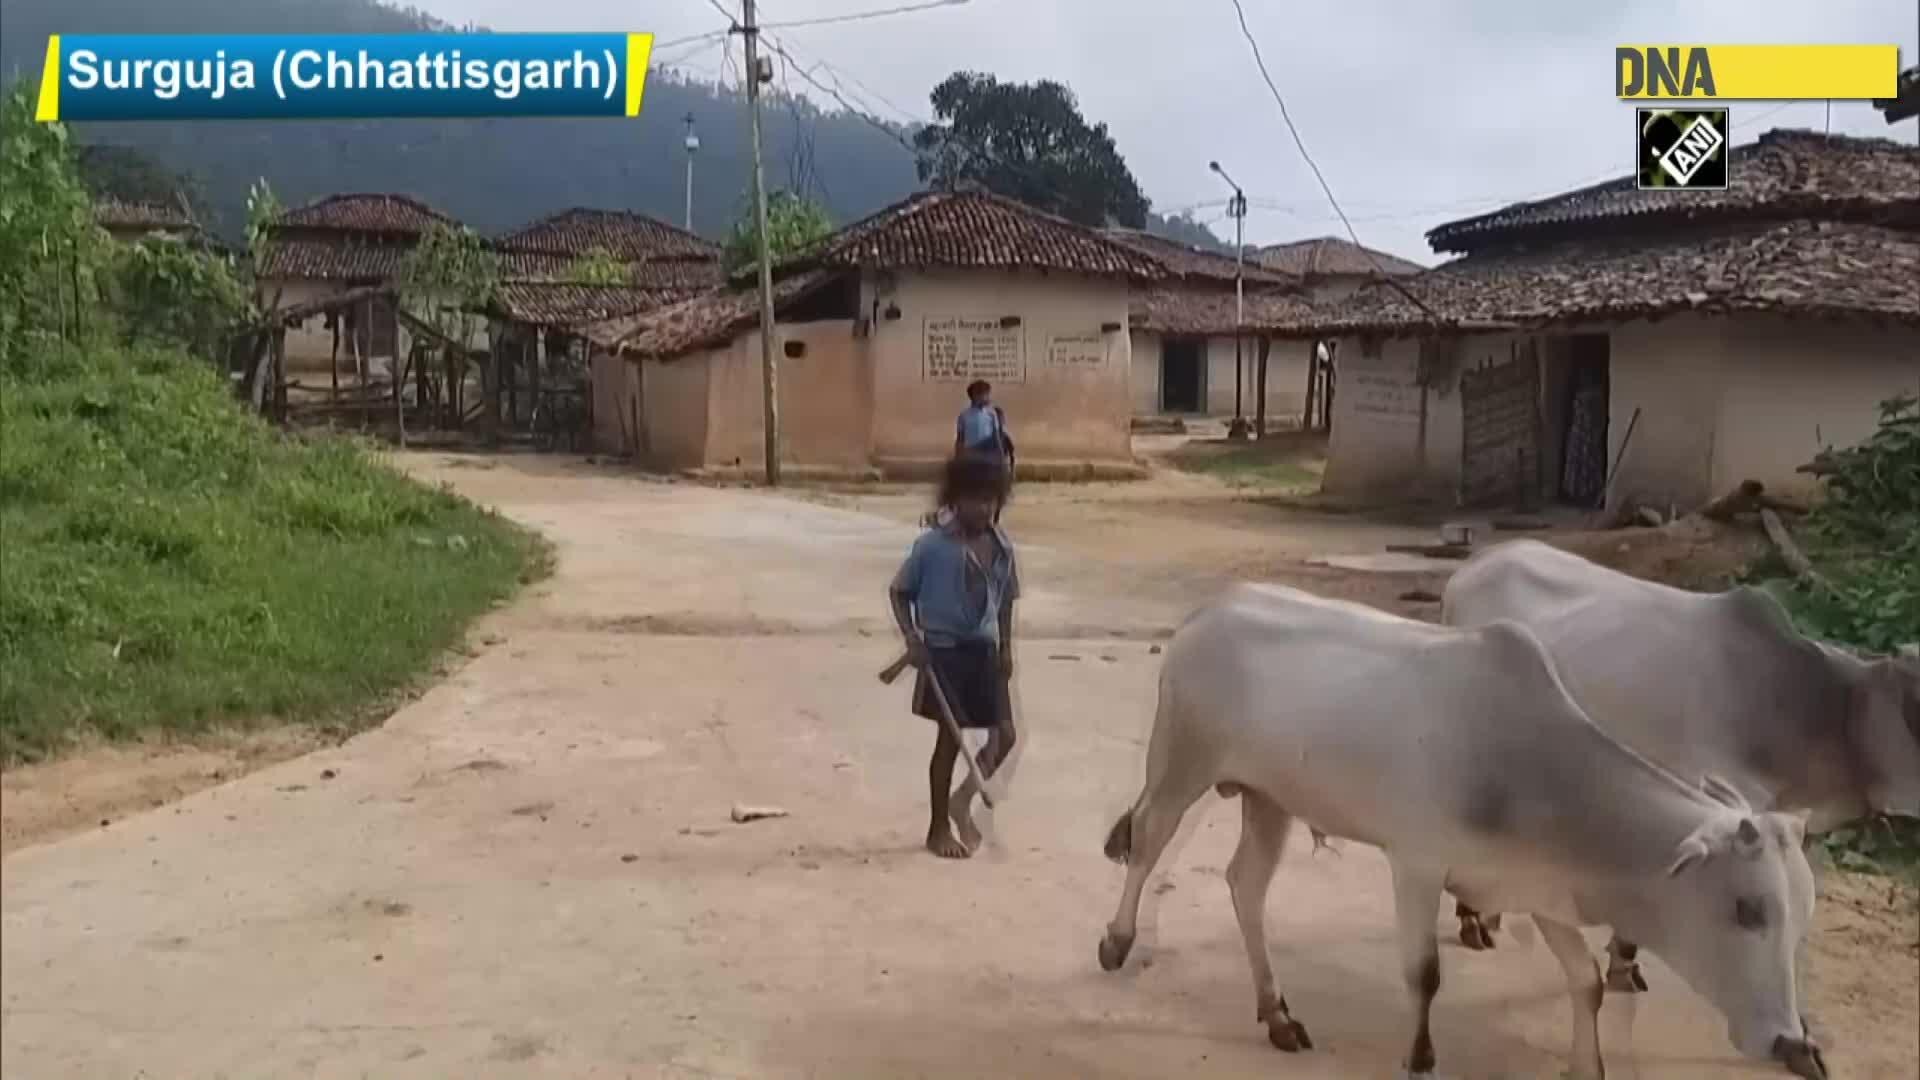 Chhattisgarh villagers lay down pipelines network, connecting water source to resolve water crisis - DNA India